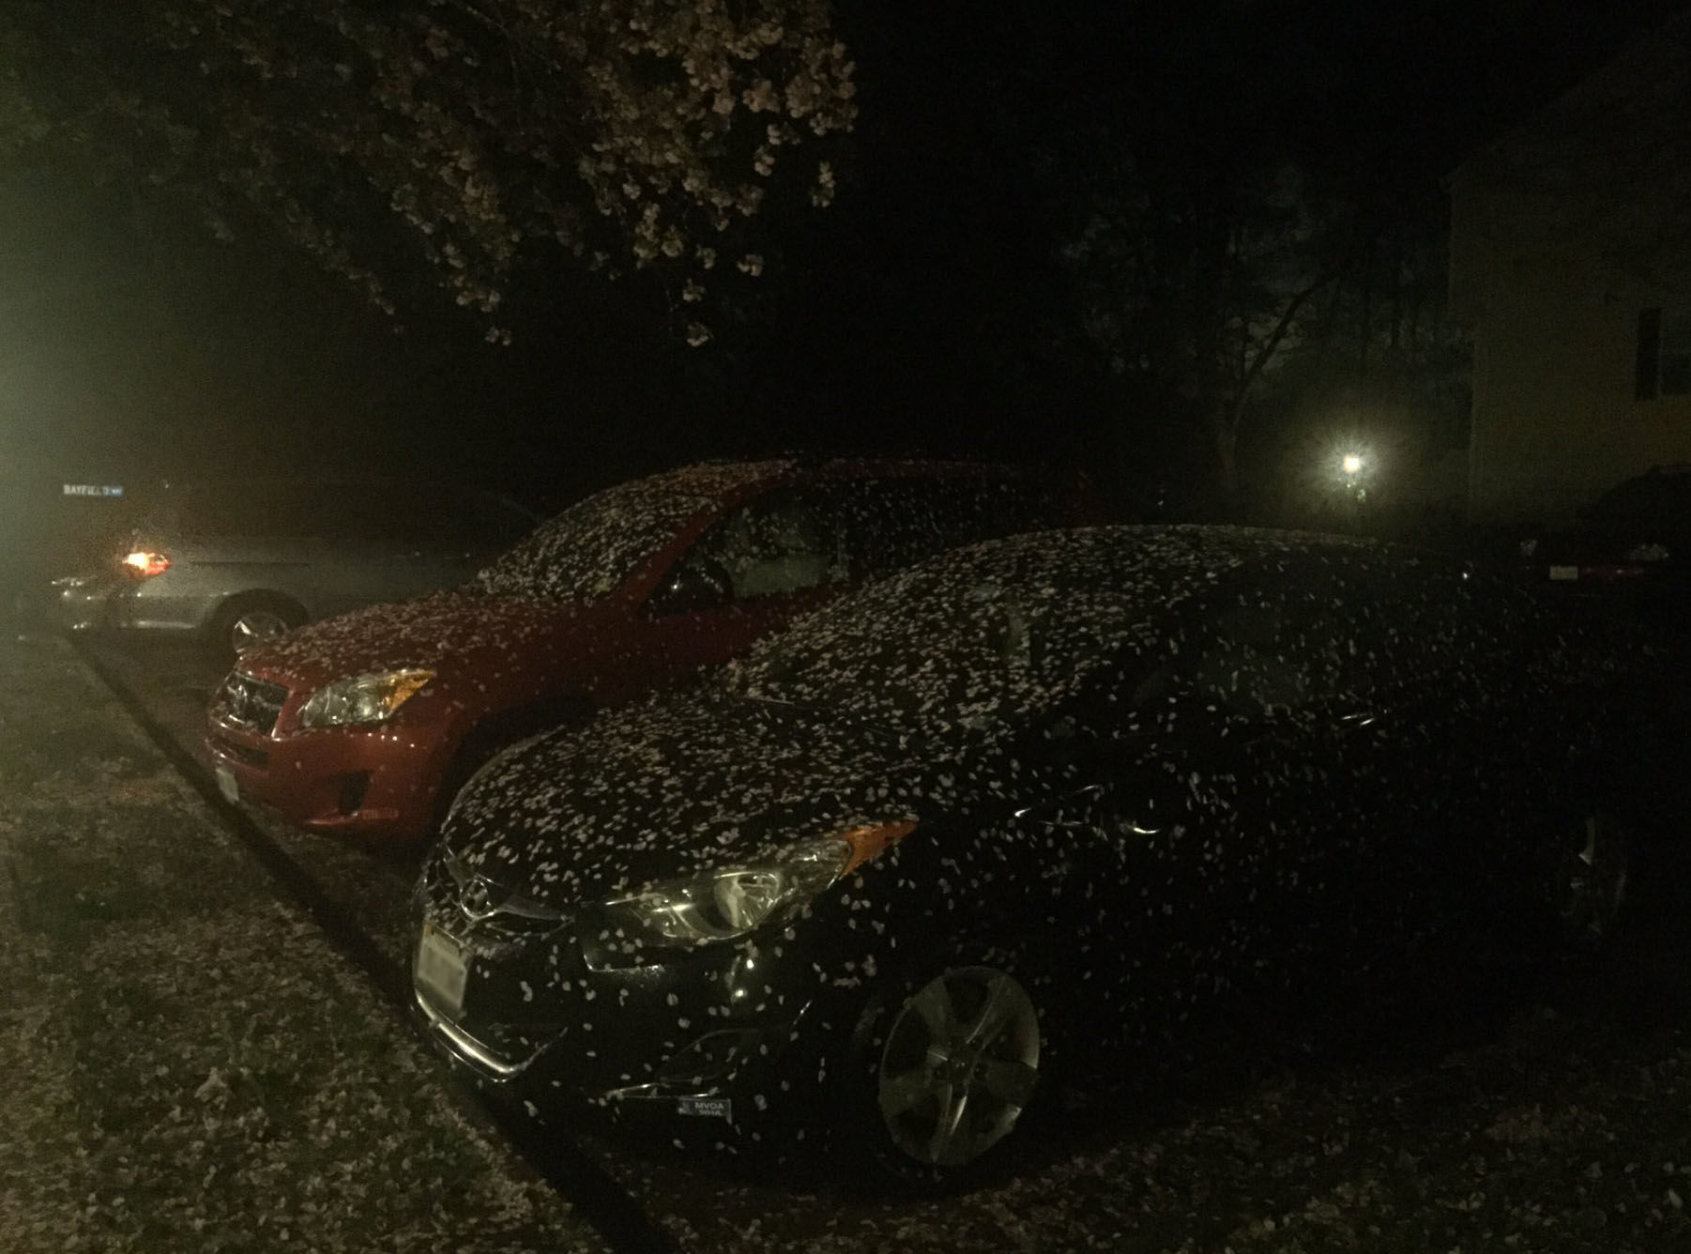 Blooms for a cherry blossom tree coat cars after heavy winds blew through Fairfax Couny in Virginia on Friday, April 19, 2019. (Courtesy Leanne Wiberg)